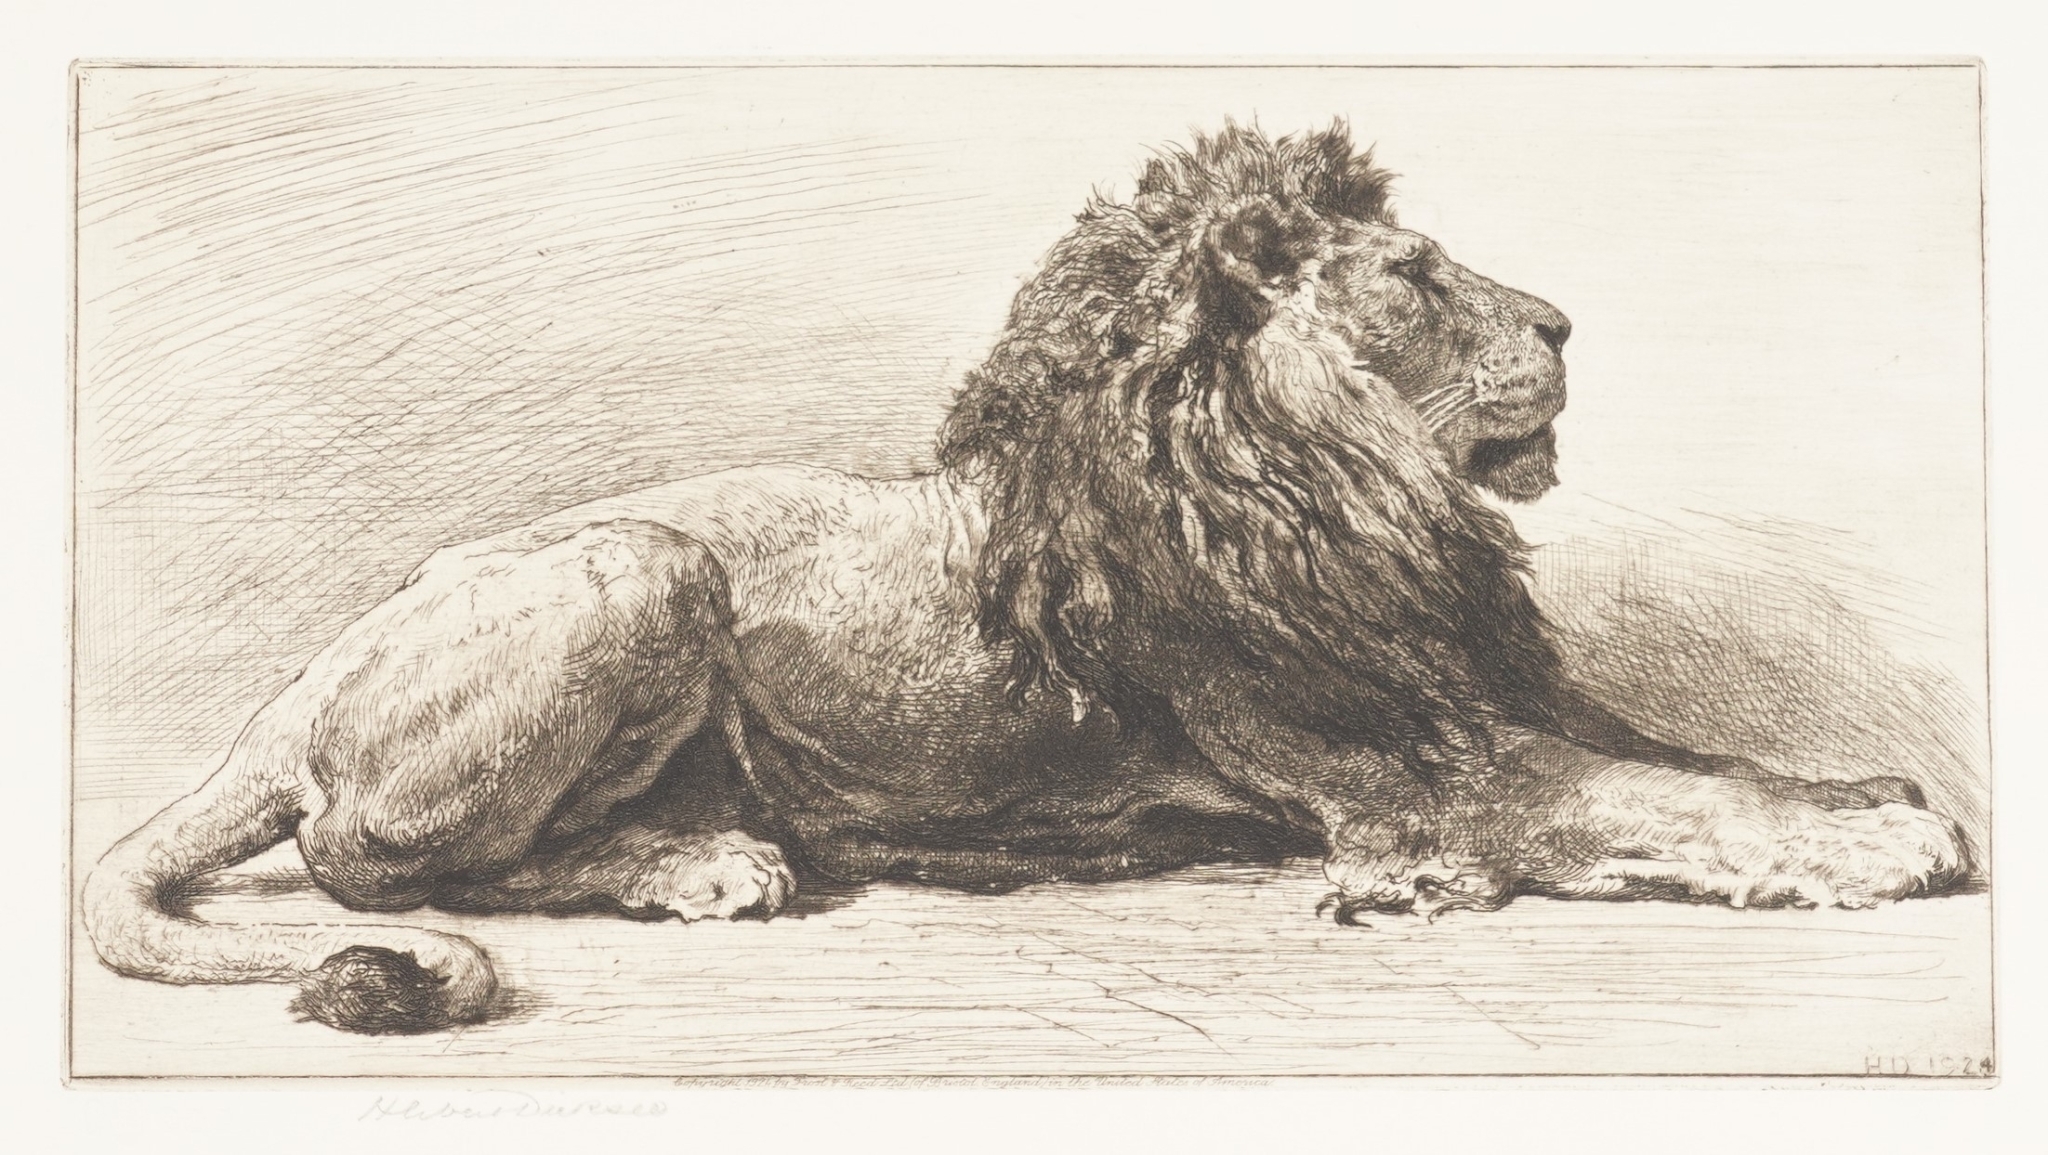 HERBERT DICKSEE (BRITISH, 1862-1942)  An Old African Lion (1924) signed 'Herbert Dicksee' (lower left margin), published by Frost & Reed  etching 15 x 27.5cm £200-400